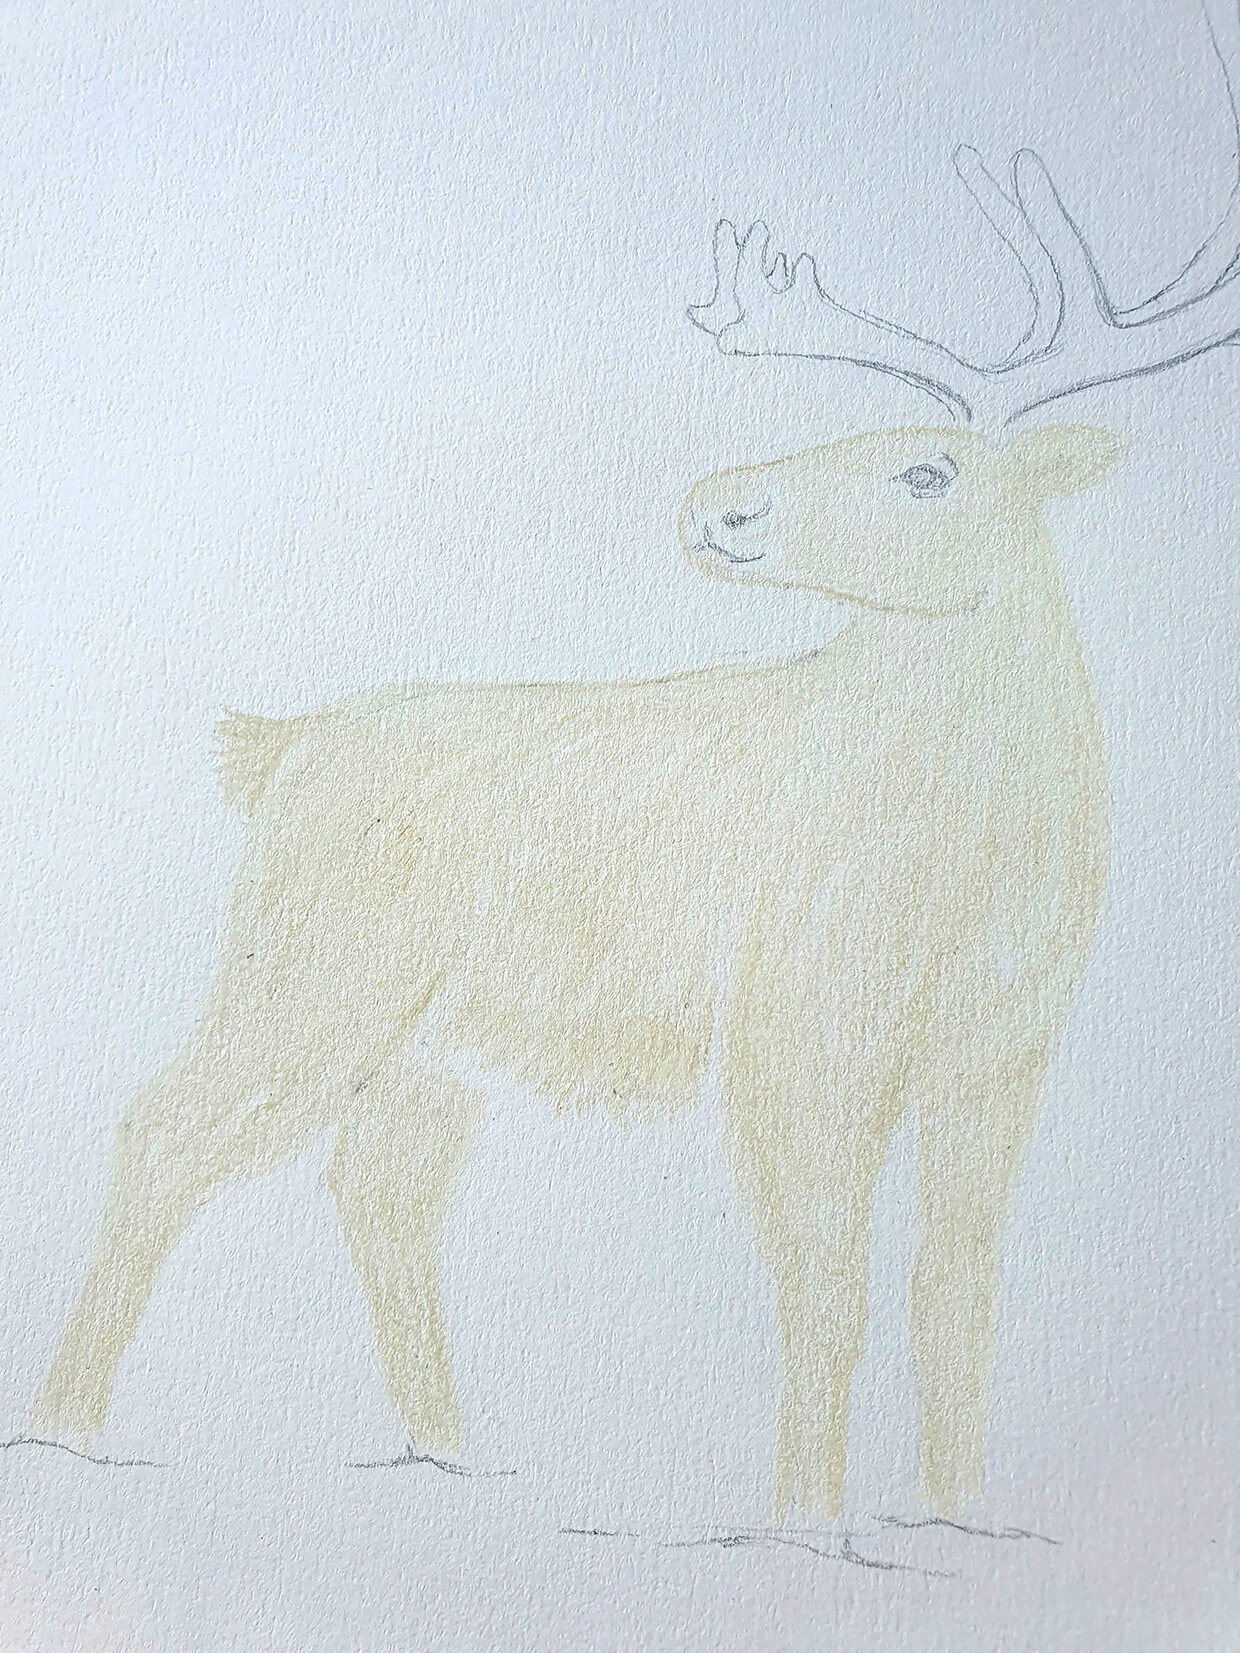 how to draw a reindeer_Step4_B